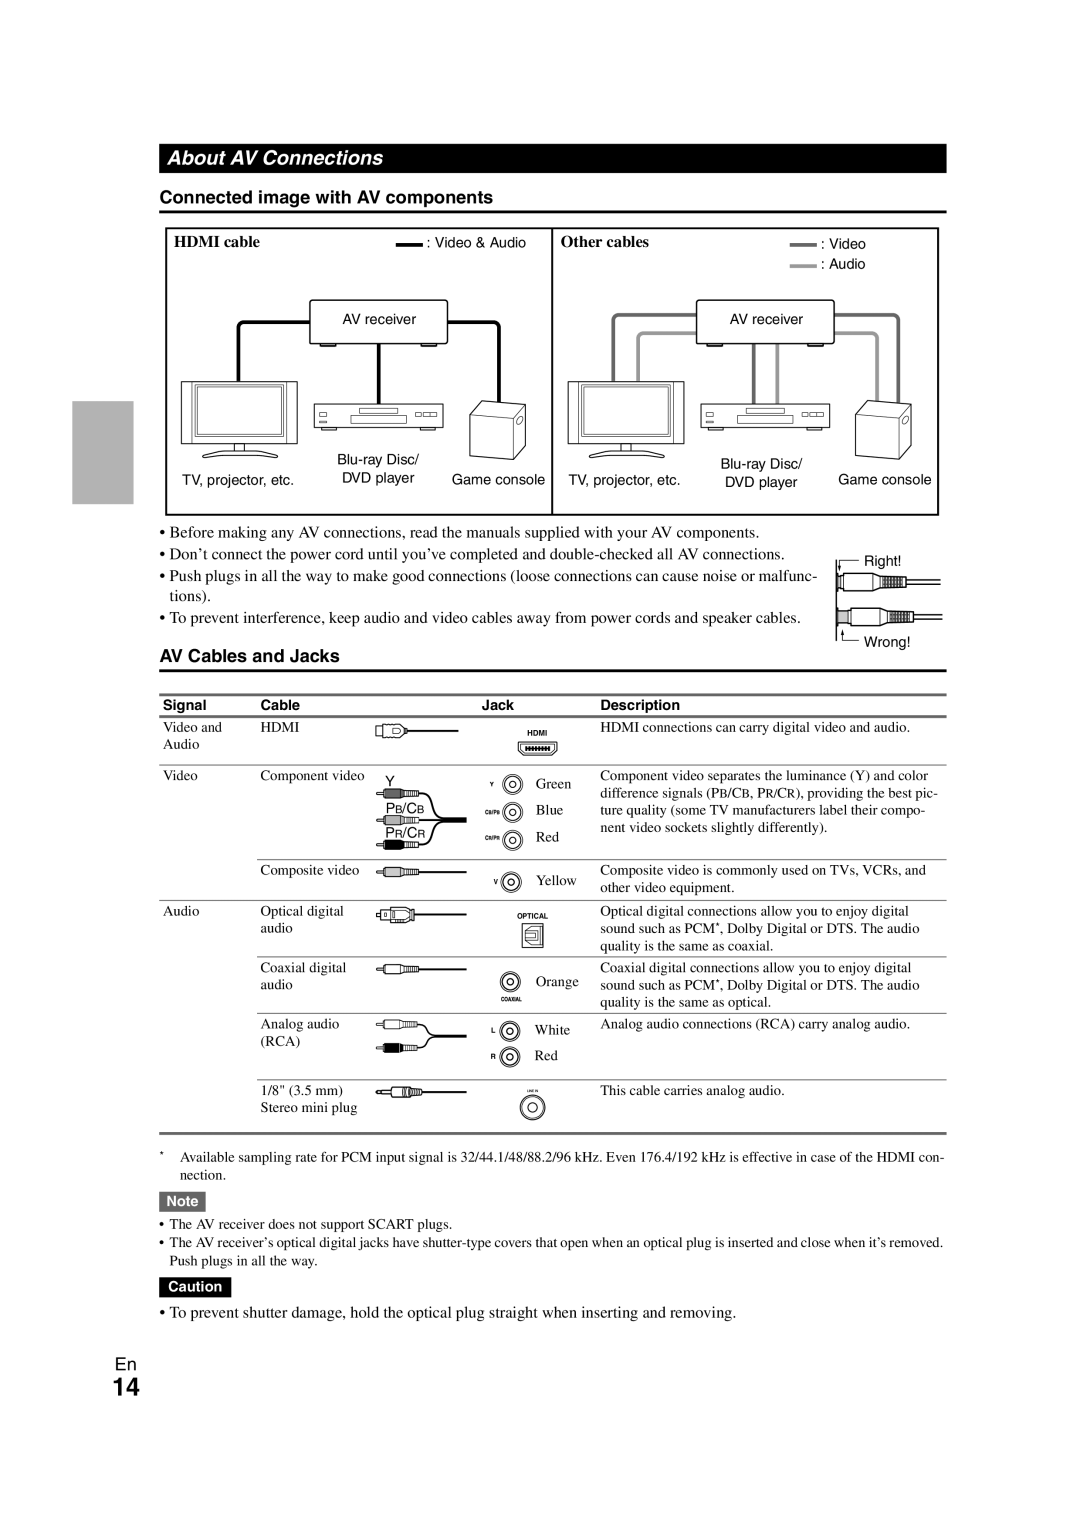 Onkyo HT-R980 instruction manual About AV Connections, Connected image with AV components, AV Cables and Jacks 